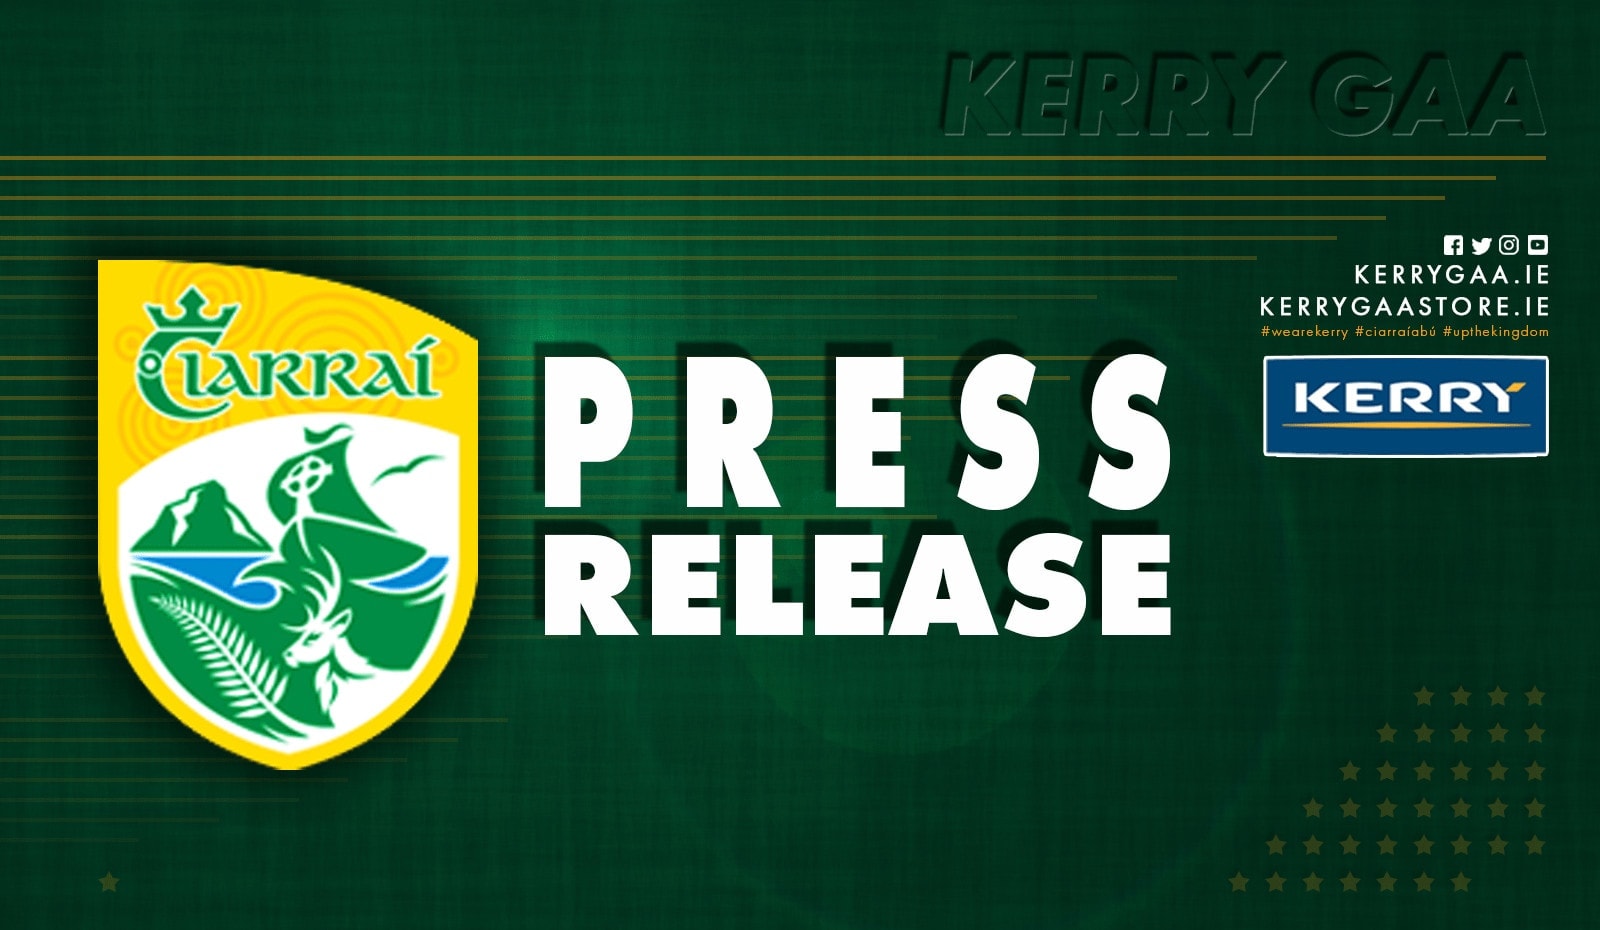 Statement from Kerry GAA